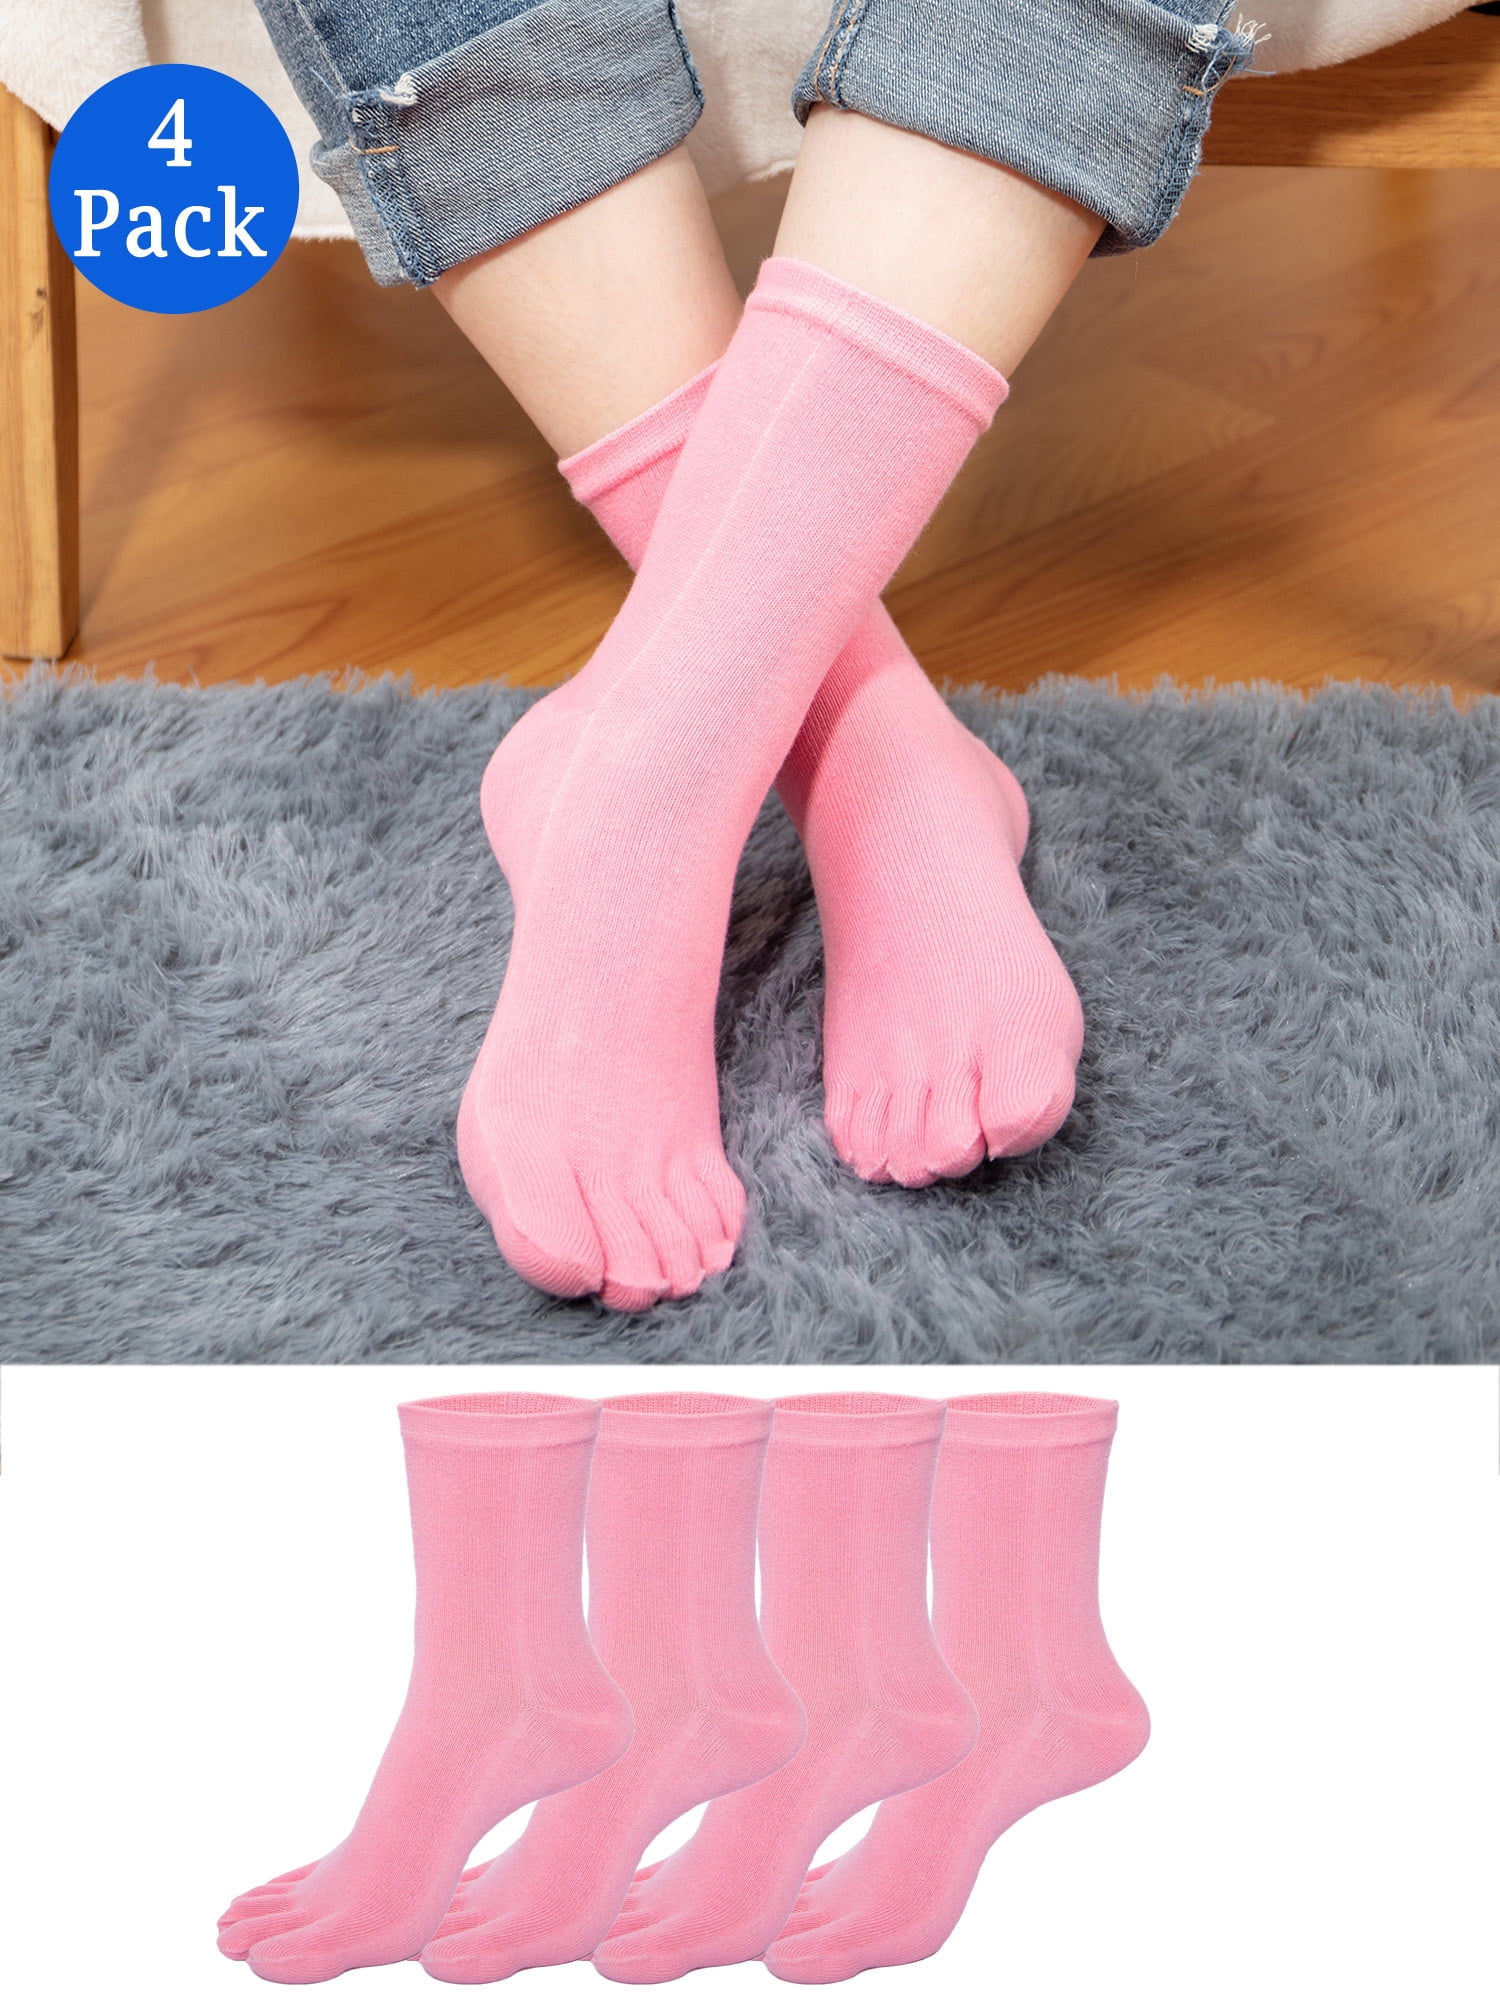 DODOING 4Pack Toe Socks Soft Solid Color Womens Flip Flop Winter Warm for  Athletic Running Sports Ankle Toe Socks,Pink 